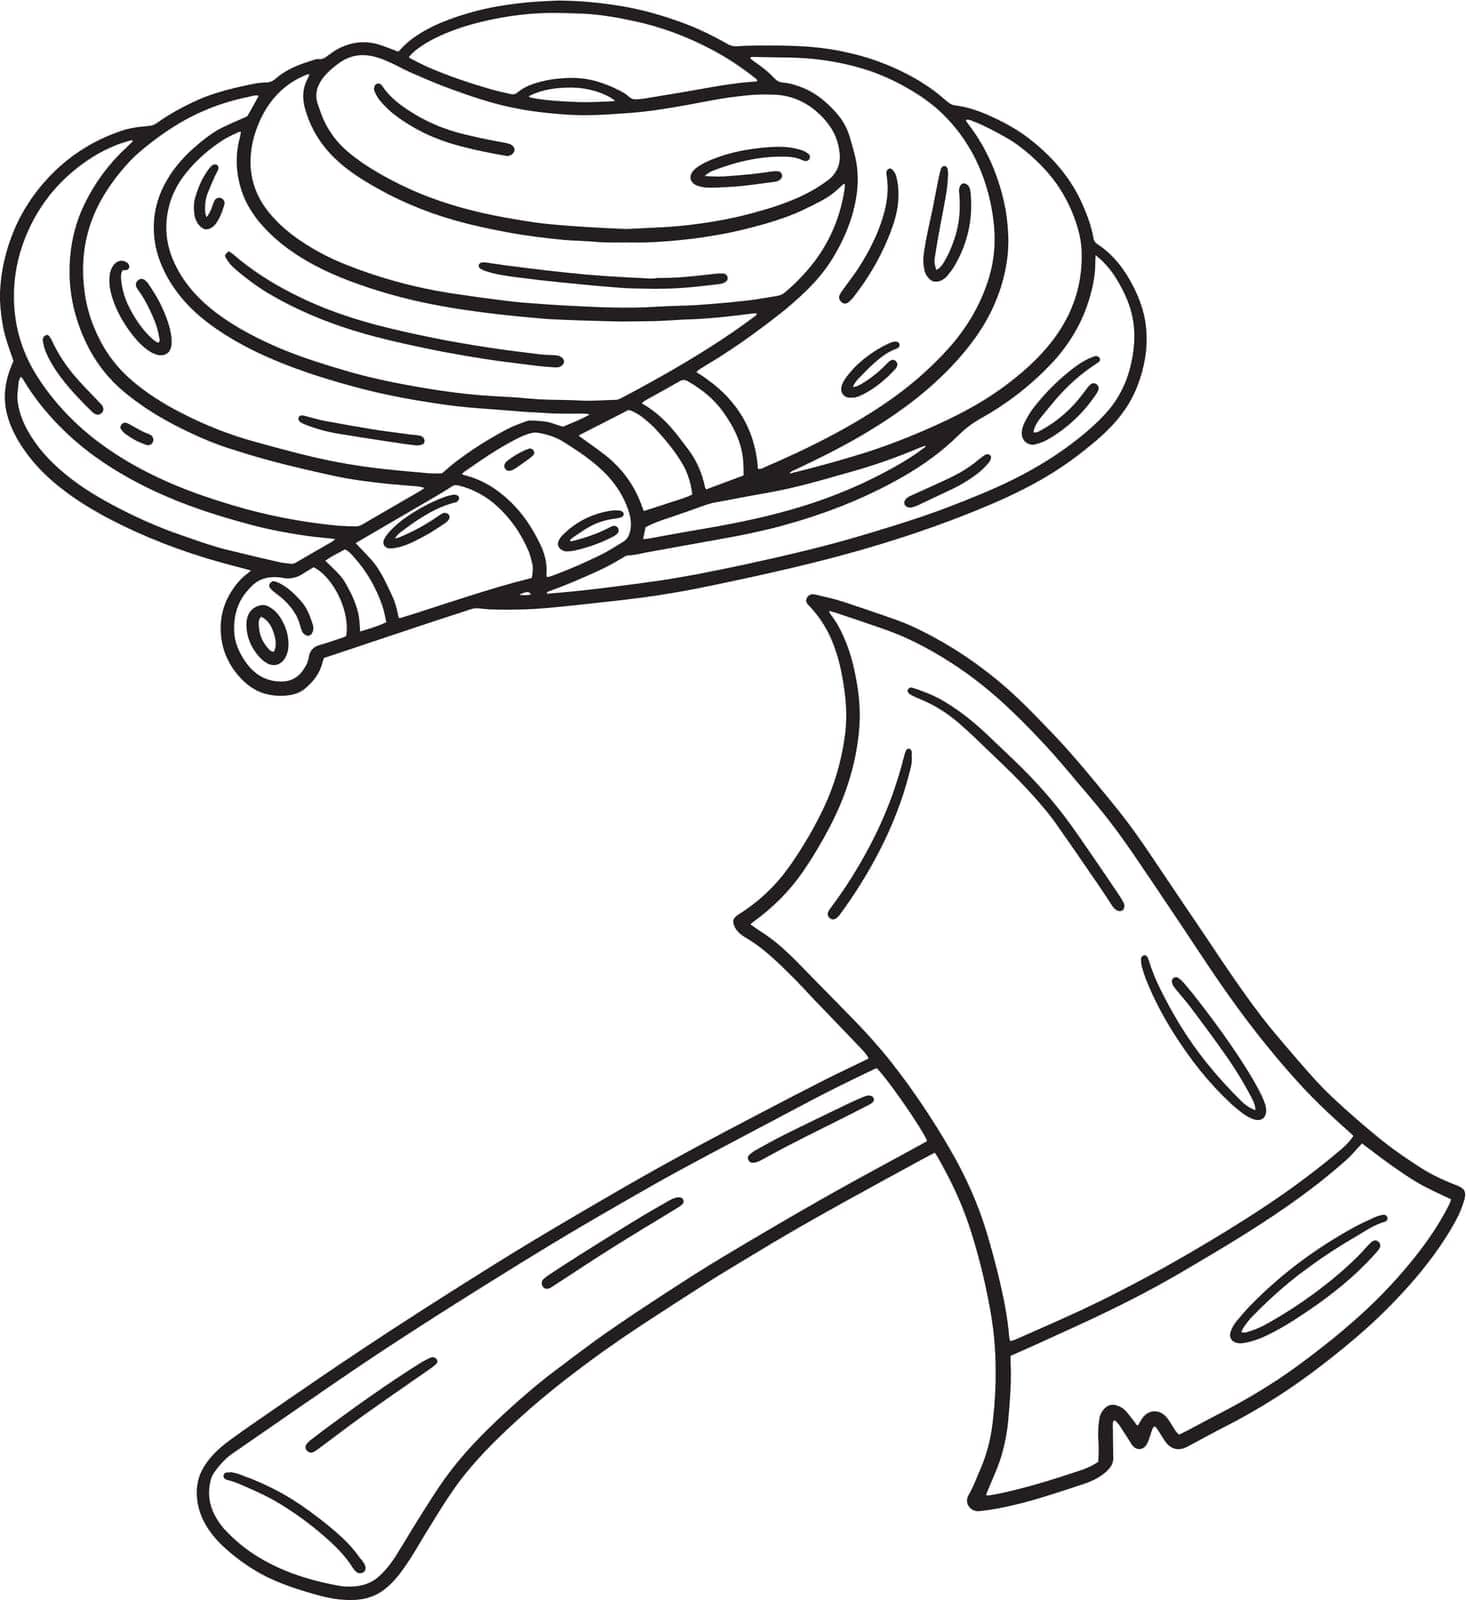 Firefighter Hose and Ax Isolated Coloring Page by abbydesign